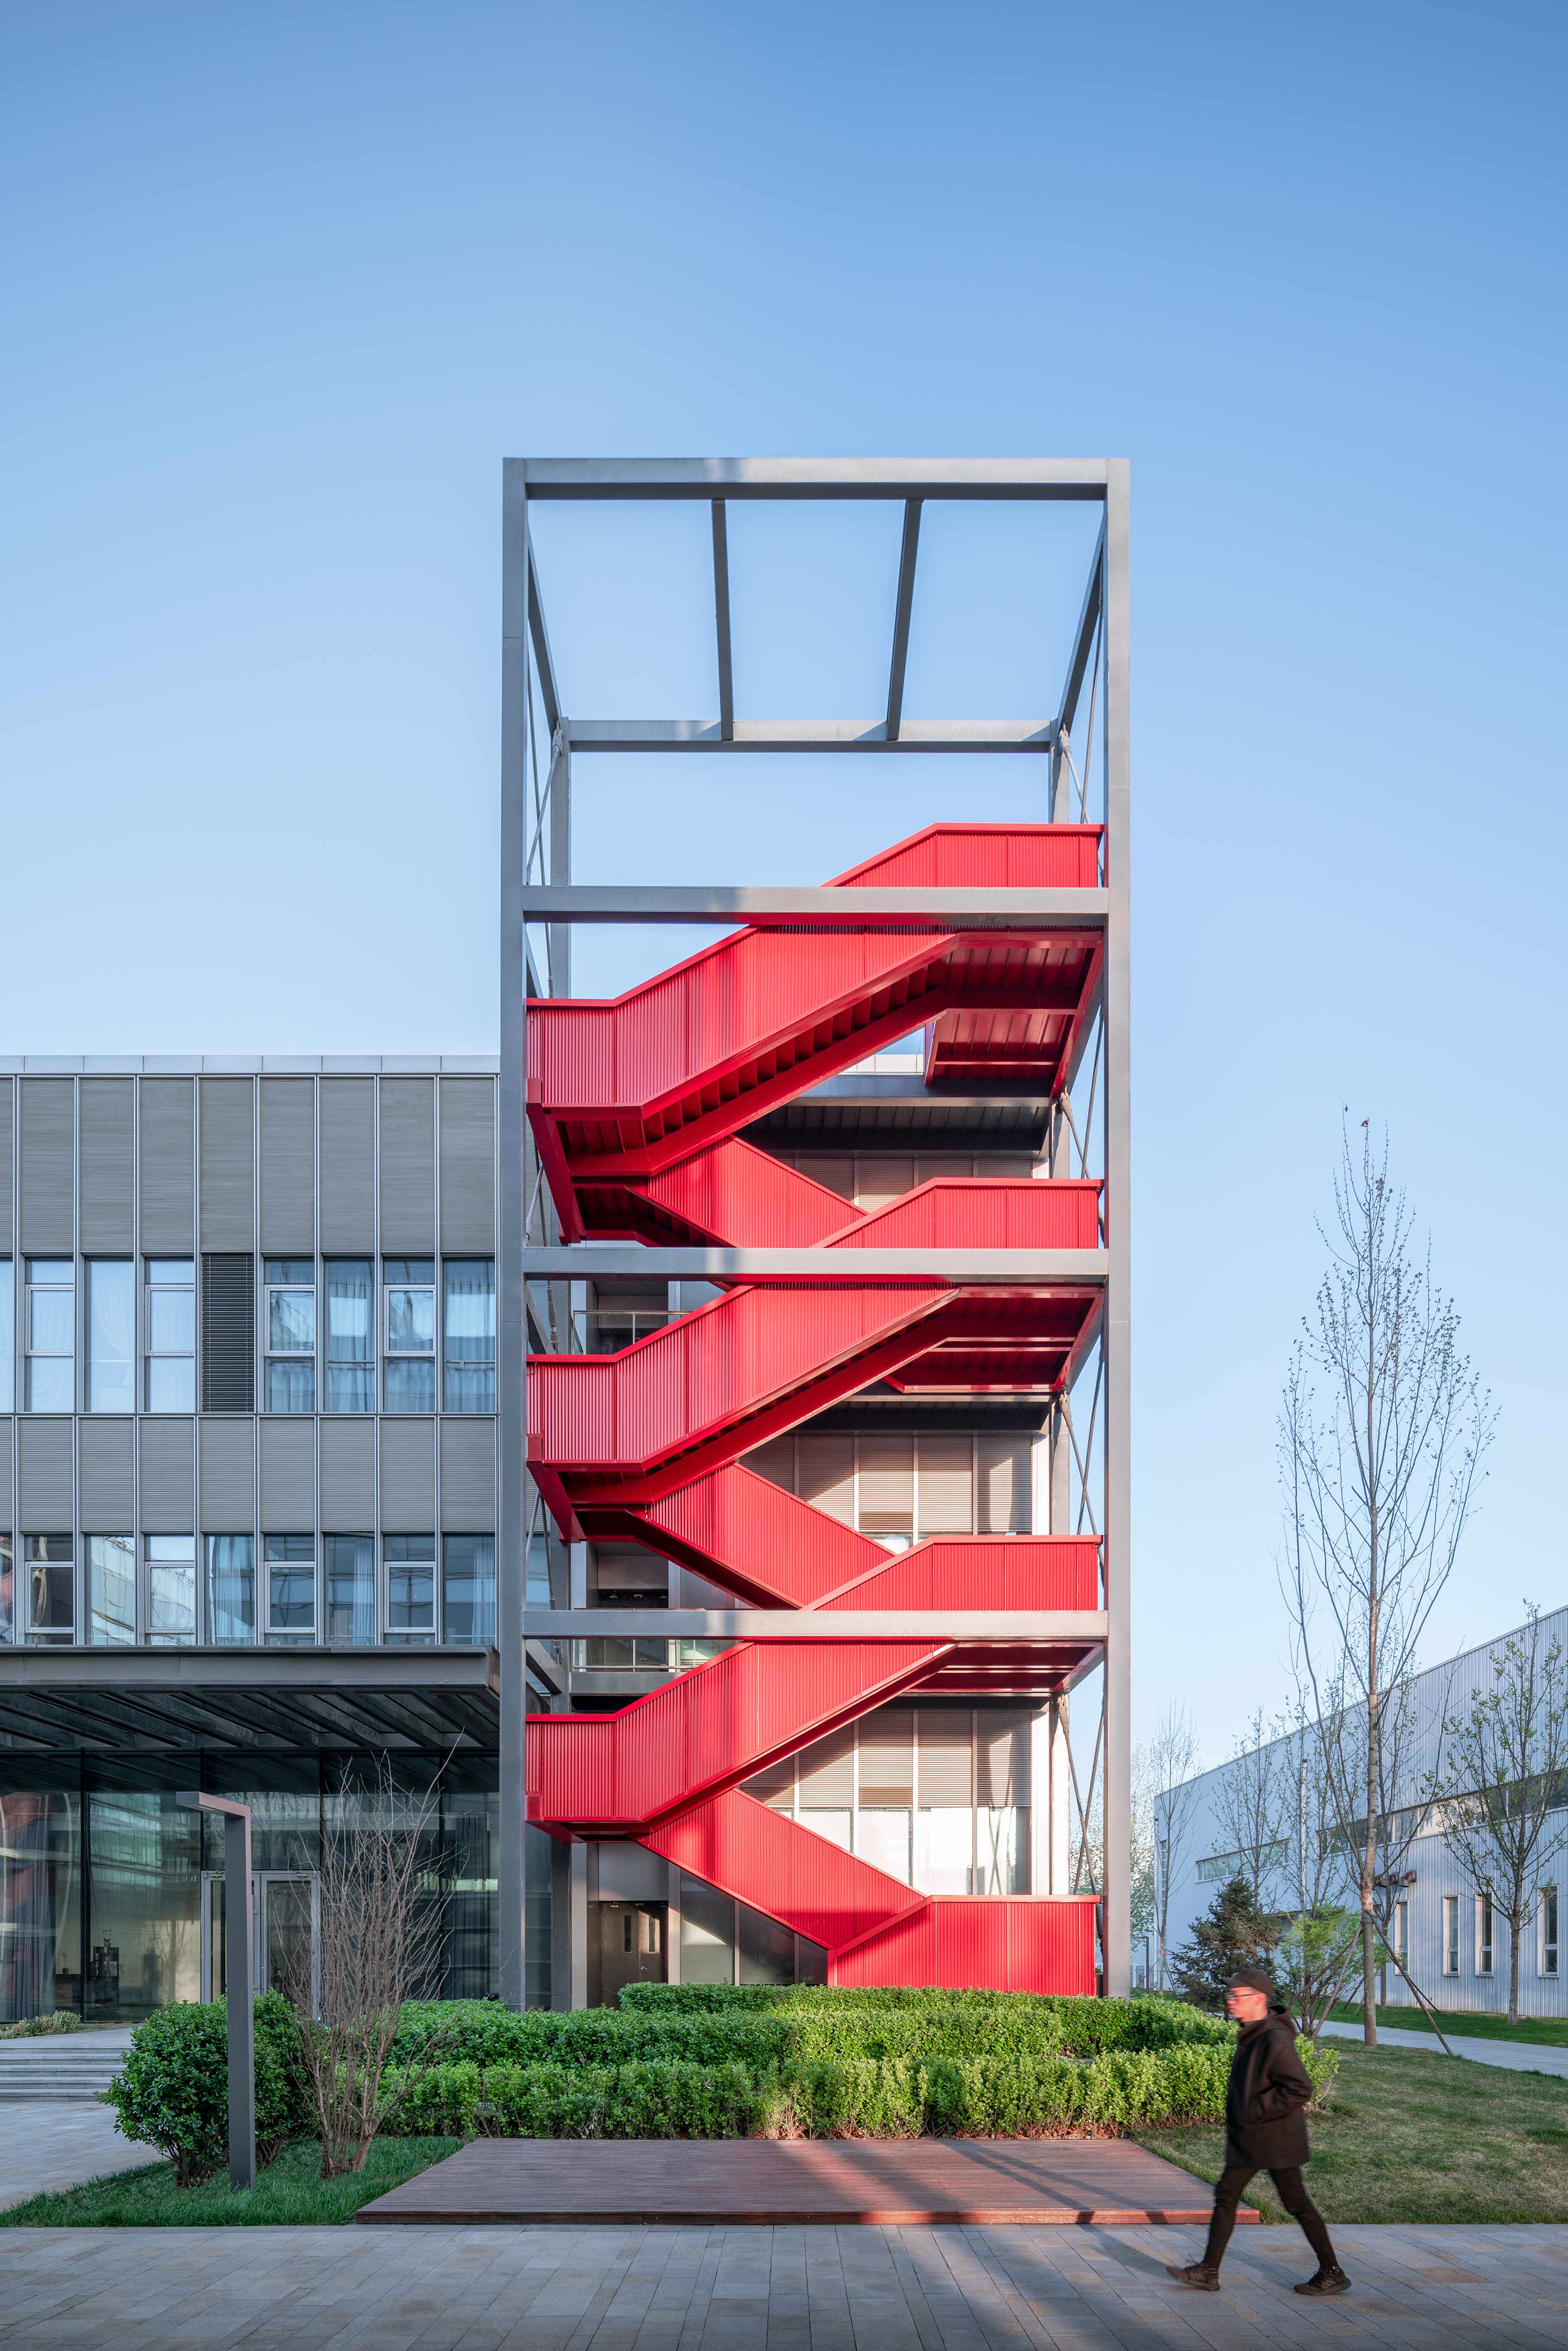 In the northeast corner of the laboratory there is also a glowing red exterior staircase